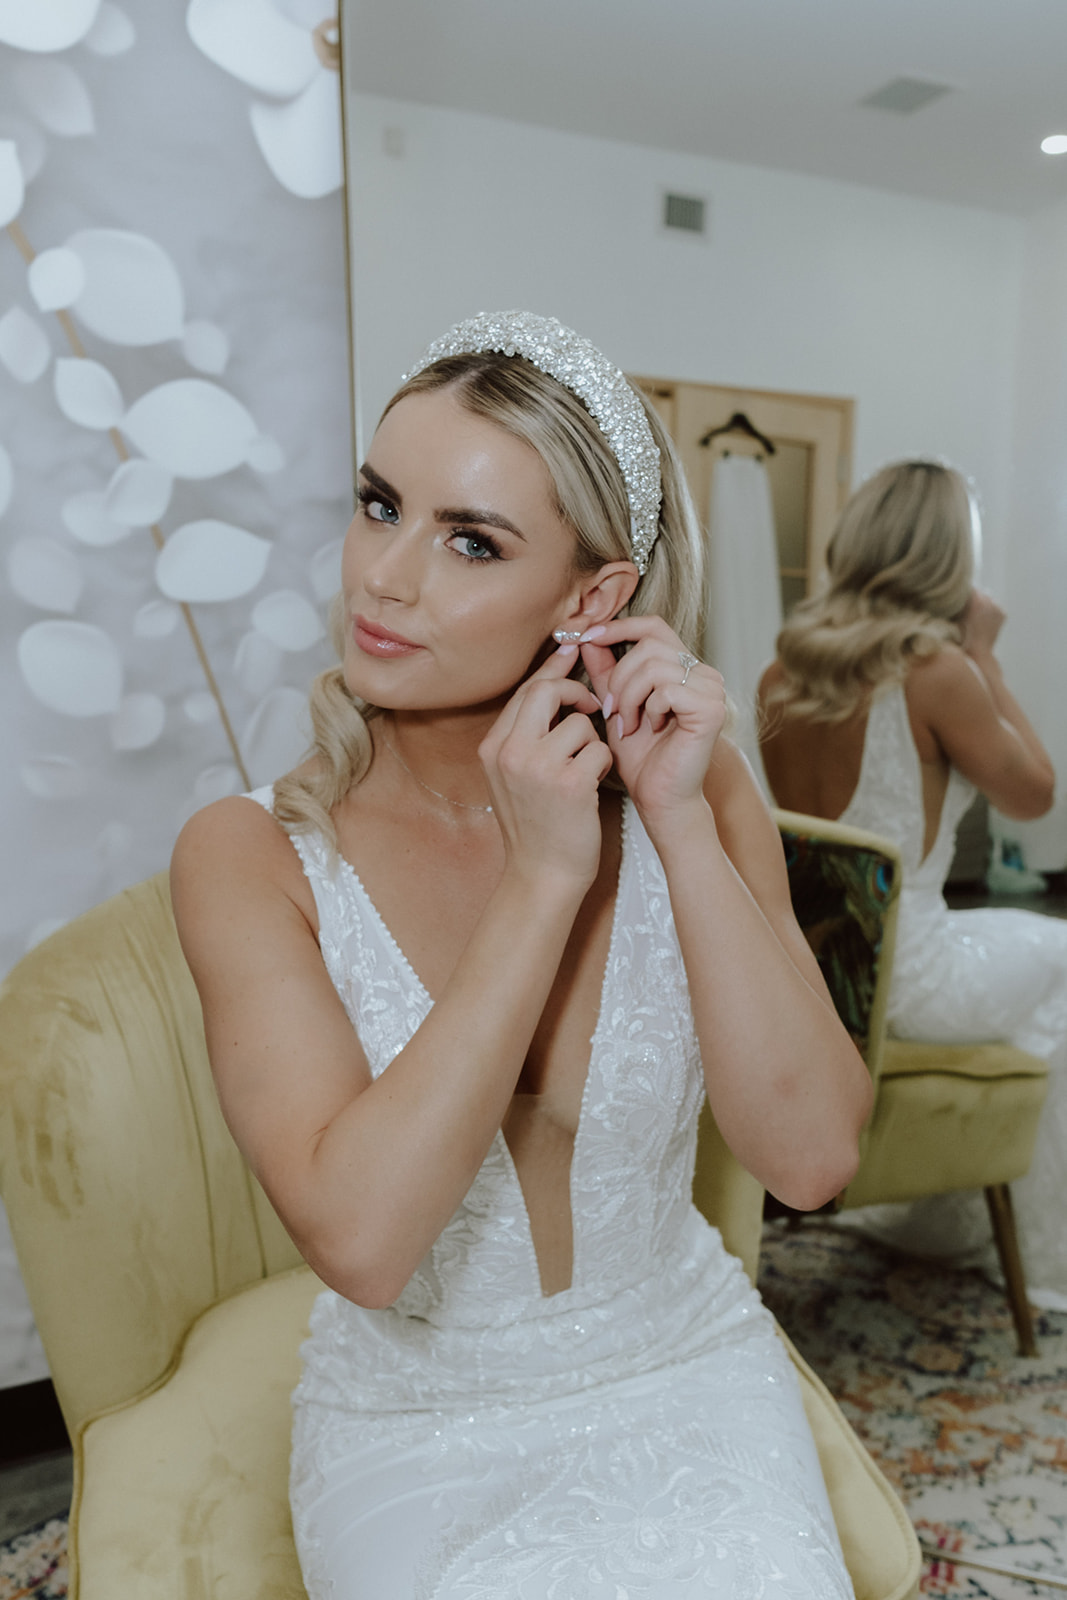 Sparkly Bridal Headband - where to shop | Featured on Brontë Bride